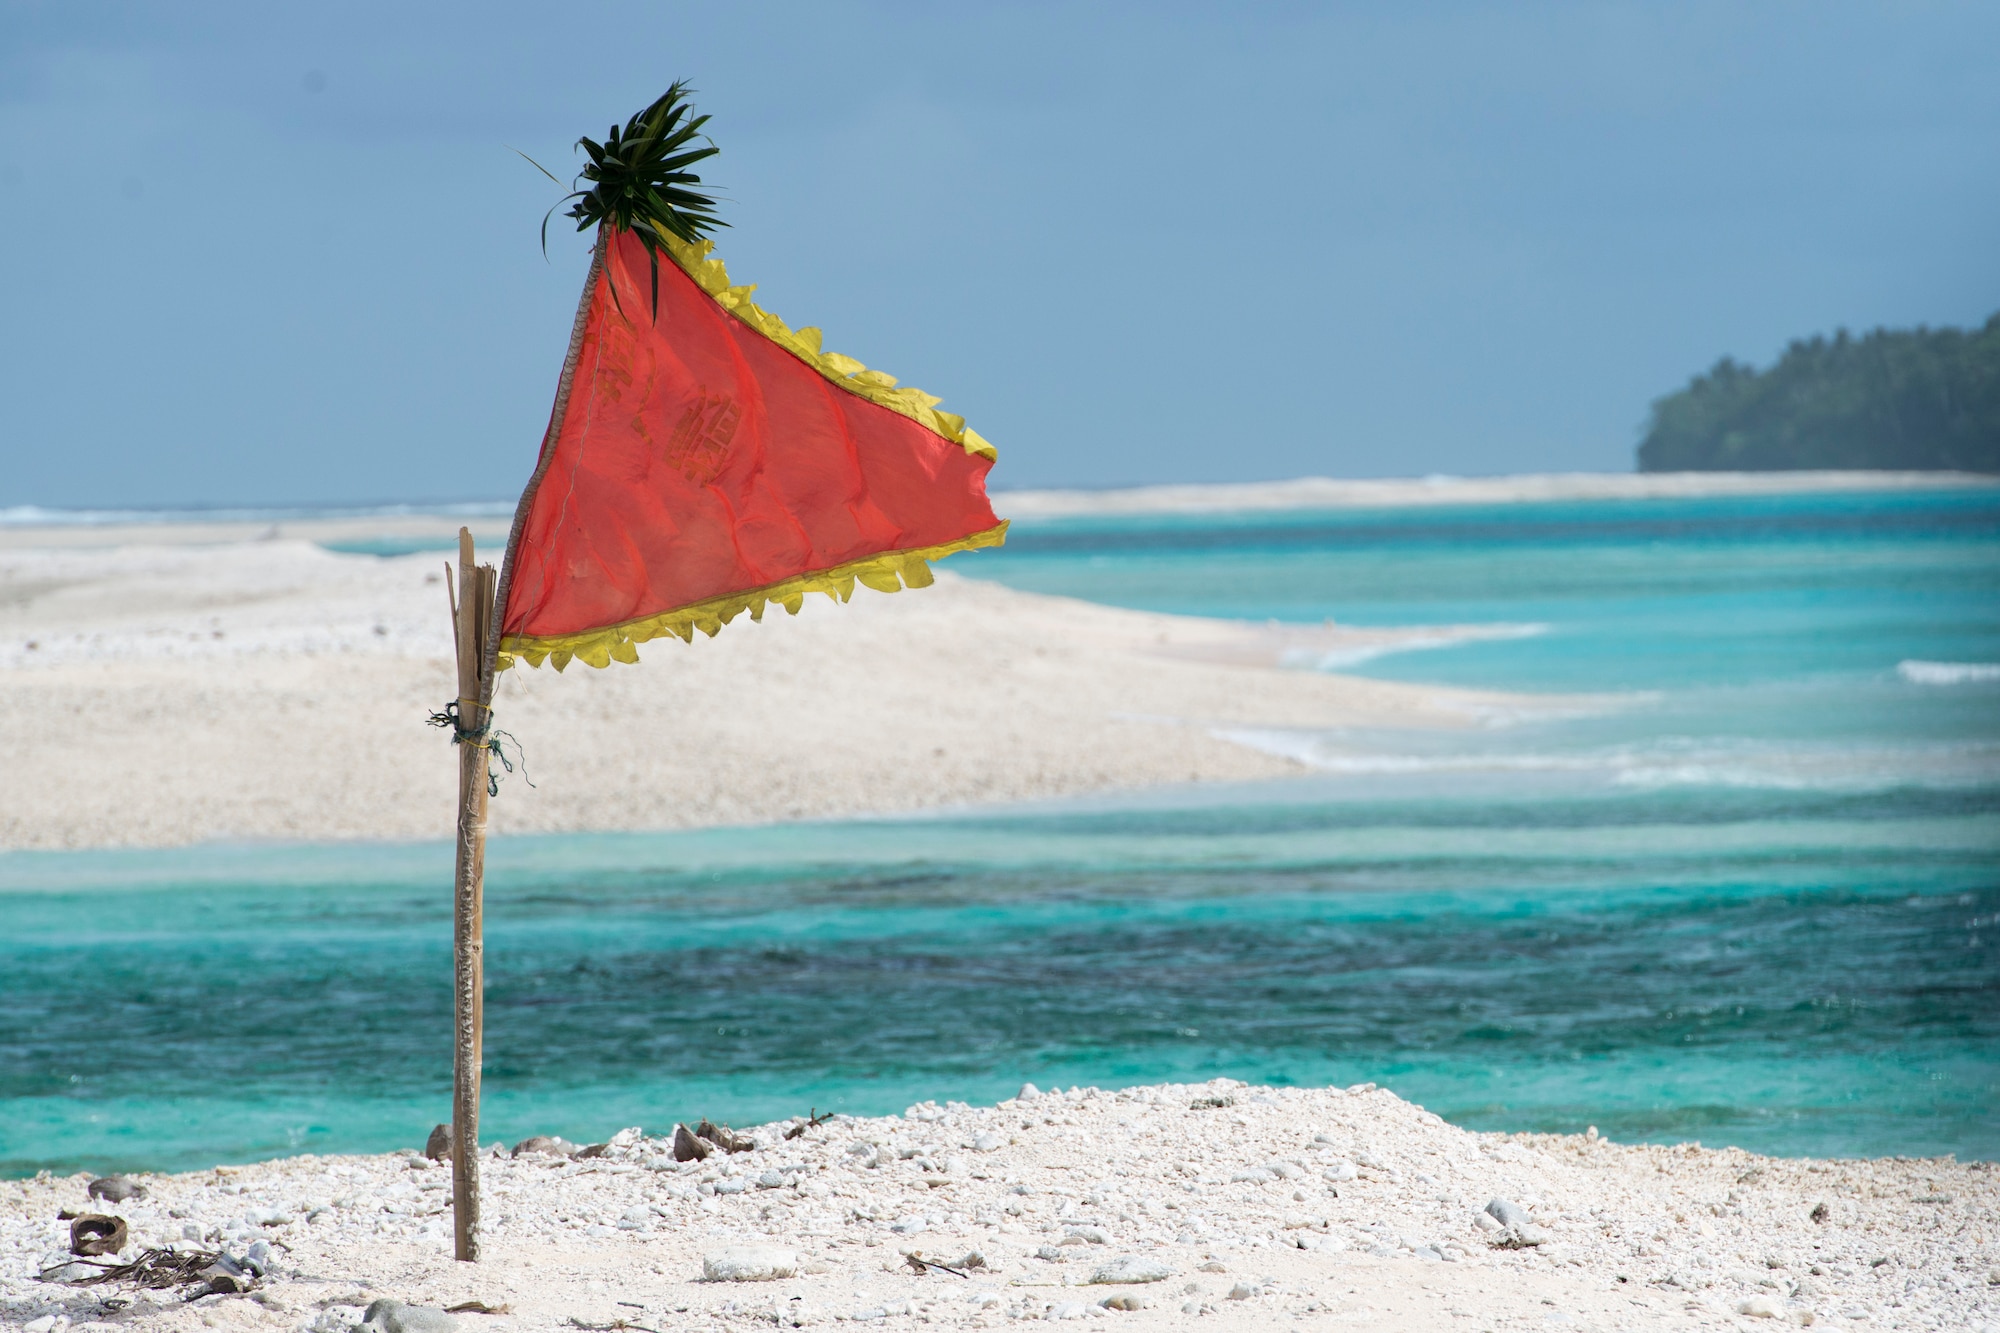 A flag flaps in the wind, marking a designated drop zone for Operation Christmas Drop packages Dec. 9, 2014, at Ulithi Atoll, Micronesia. The C-130 Hercules aircrew dropping the package flew upwind and dropped the package within sight of the flag. (U.S. Air Force photo/Staff Sgt. Cody H. Ramirez)